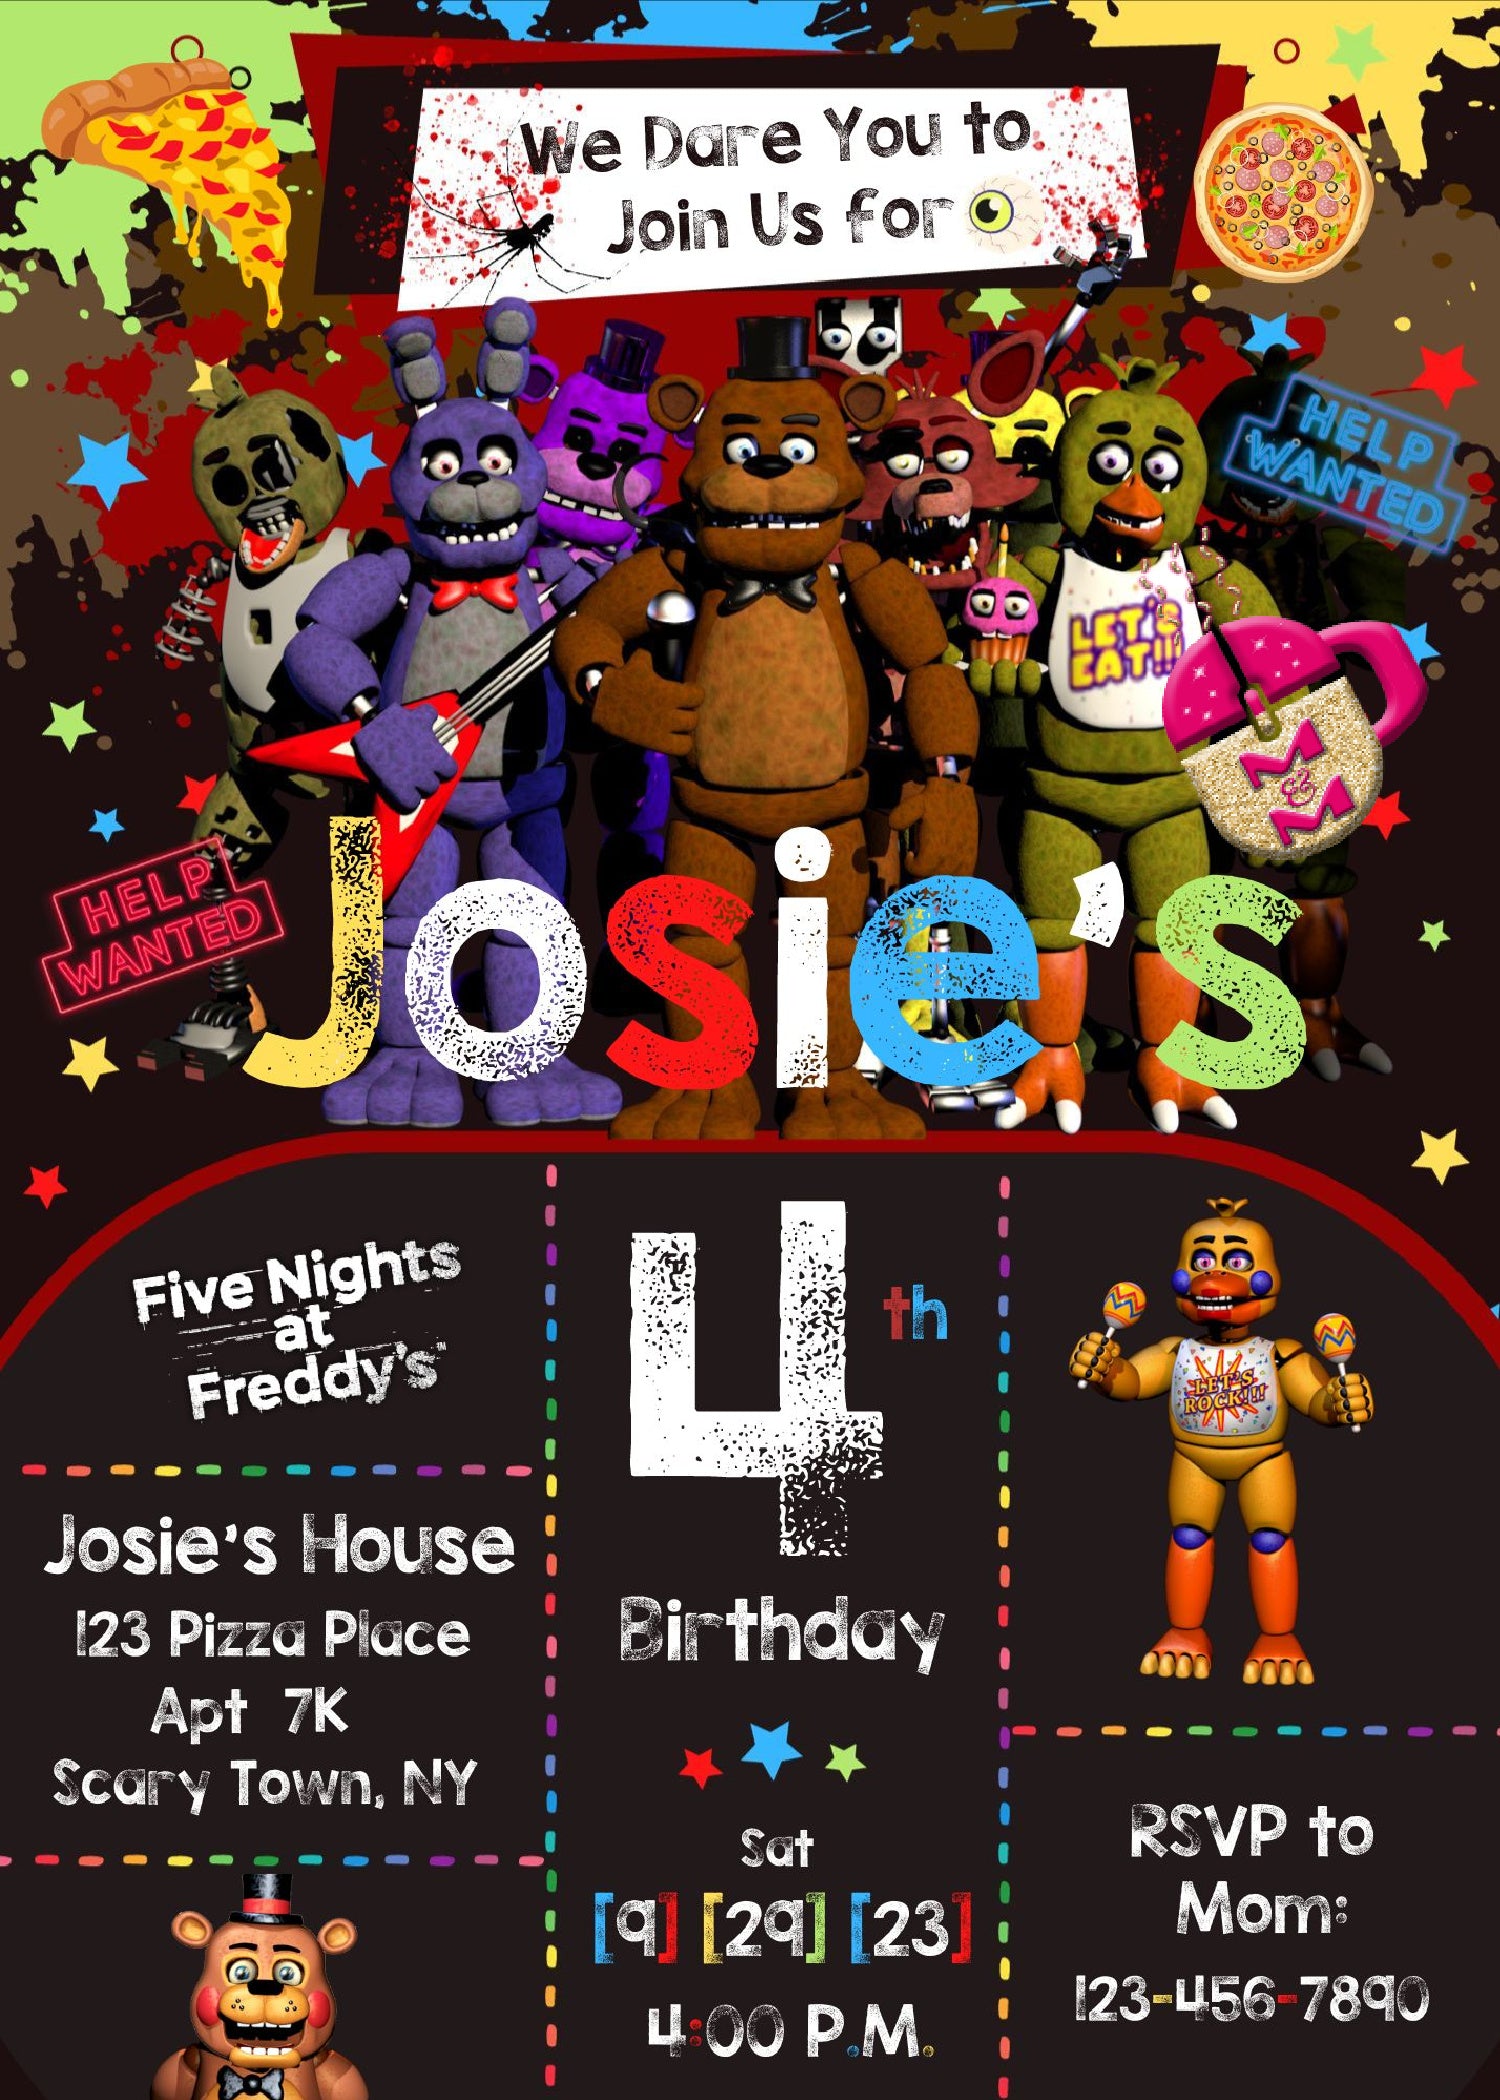 Five Nights at Freddy'S Birthday Party Supplies Kit- Five Nights